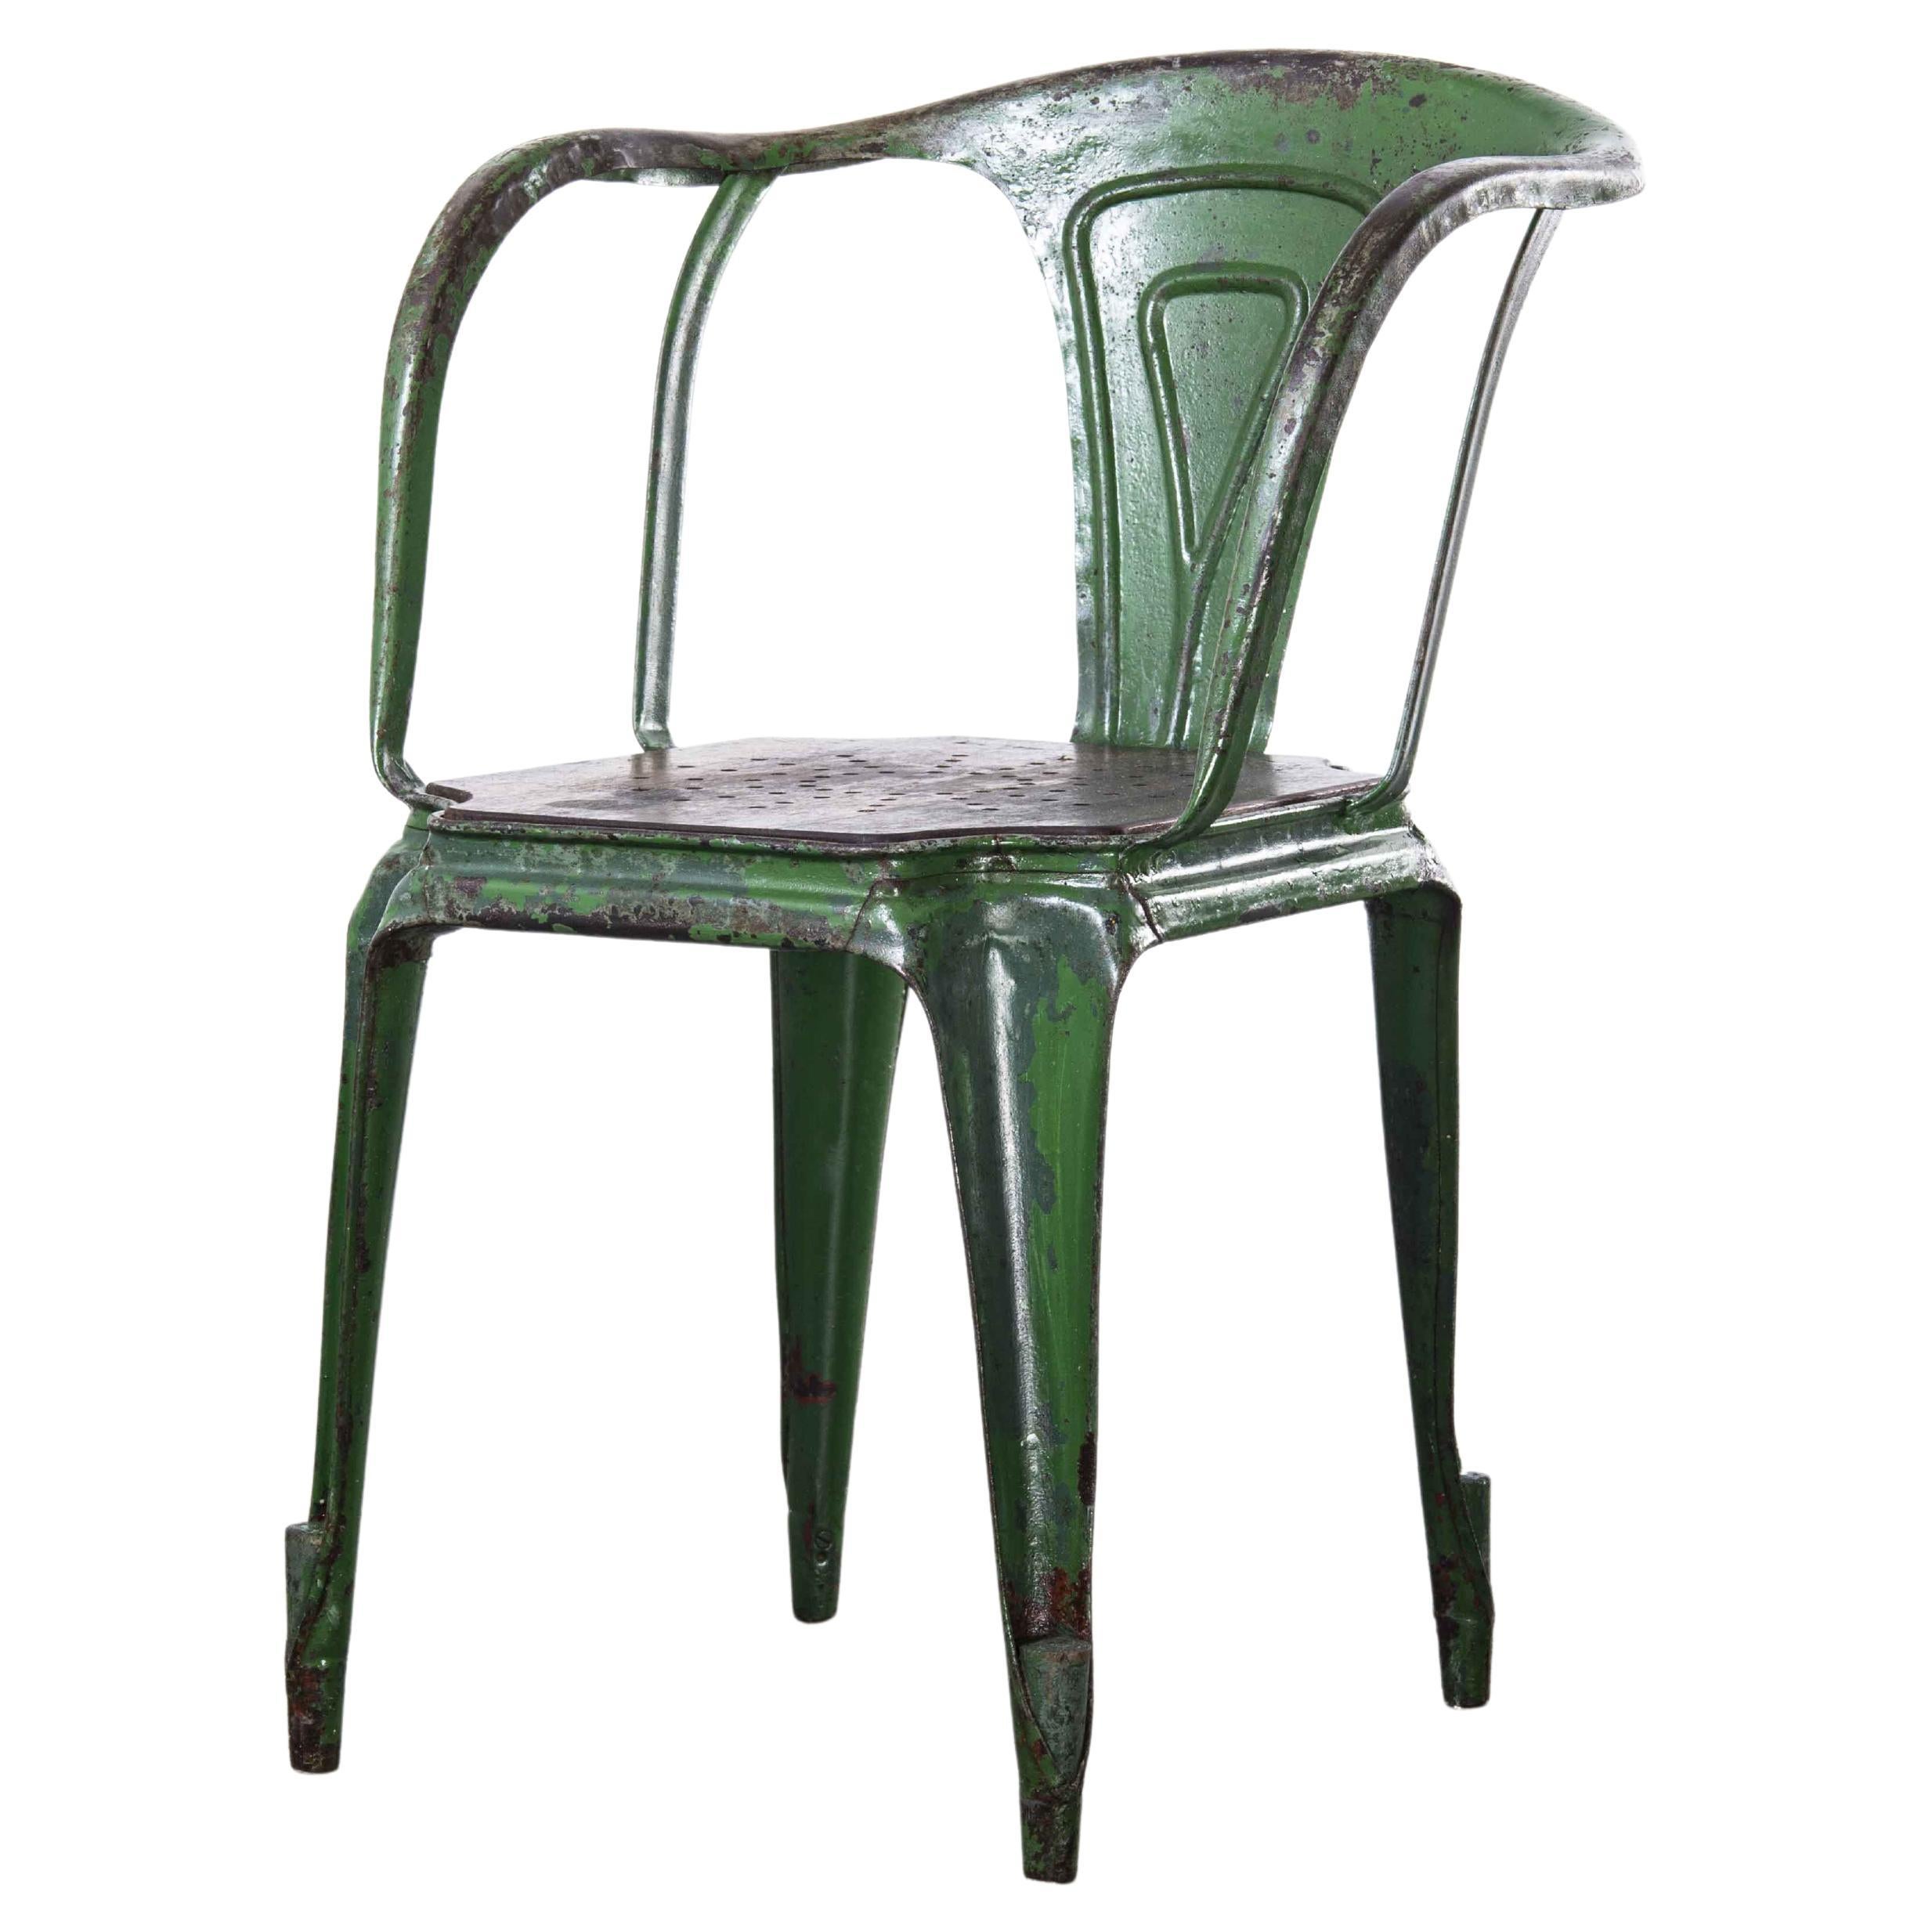 1940's Original French Multipl's Arm Chair, Green For Sale